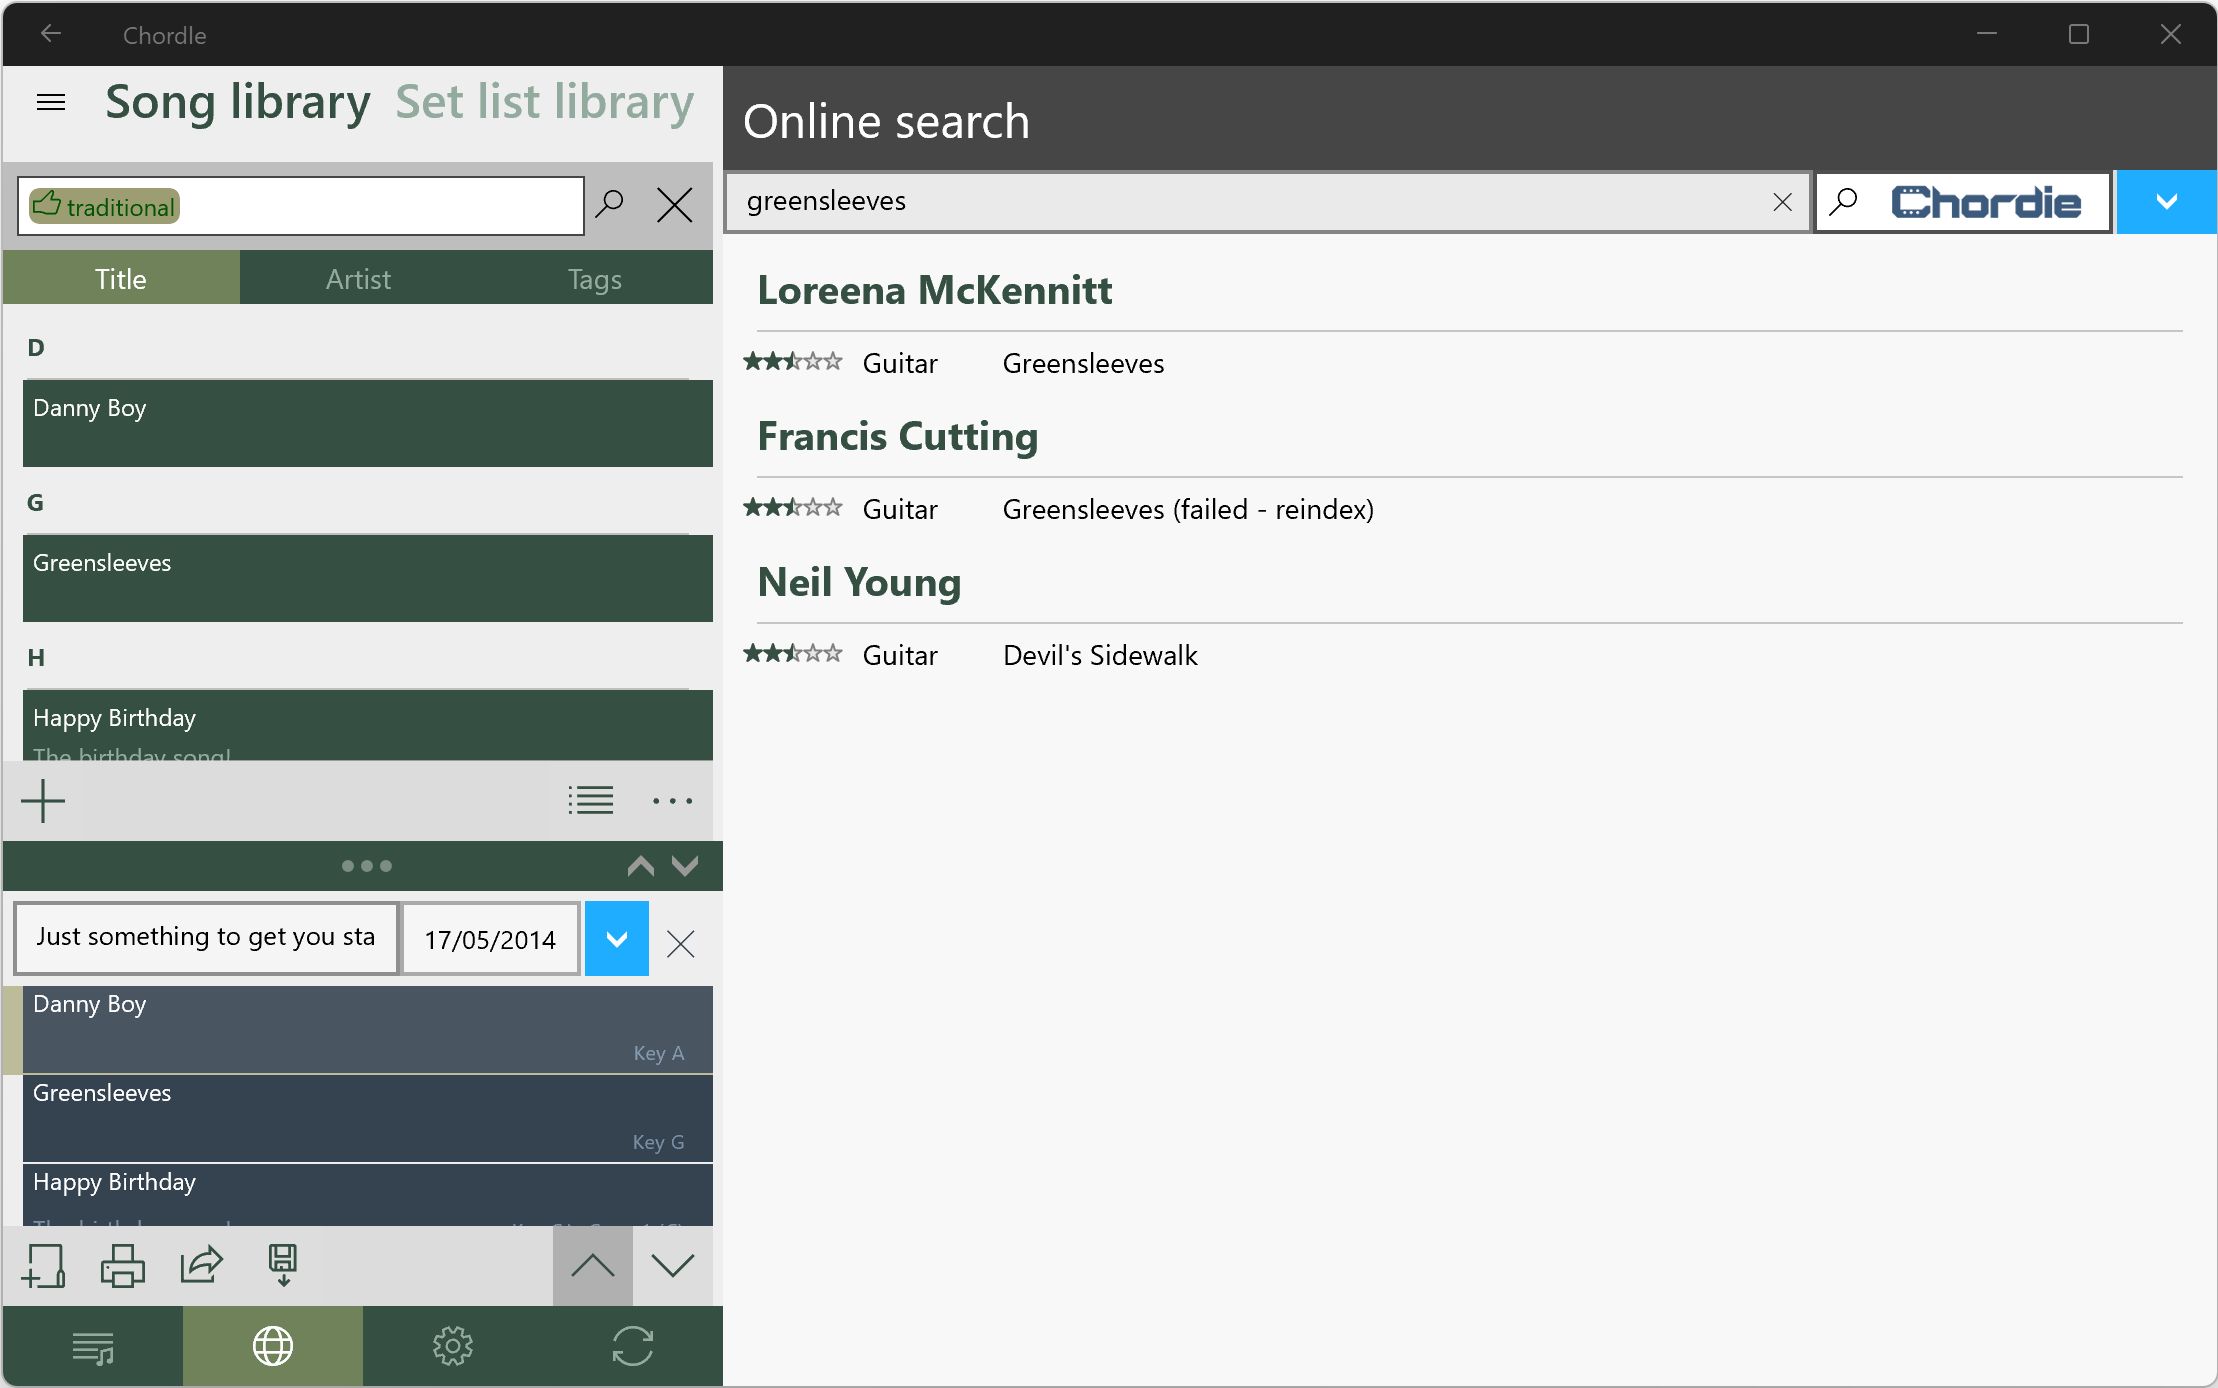 Screenshot showing the online search results window in Chordle